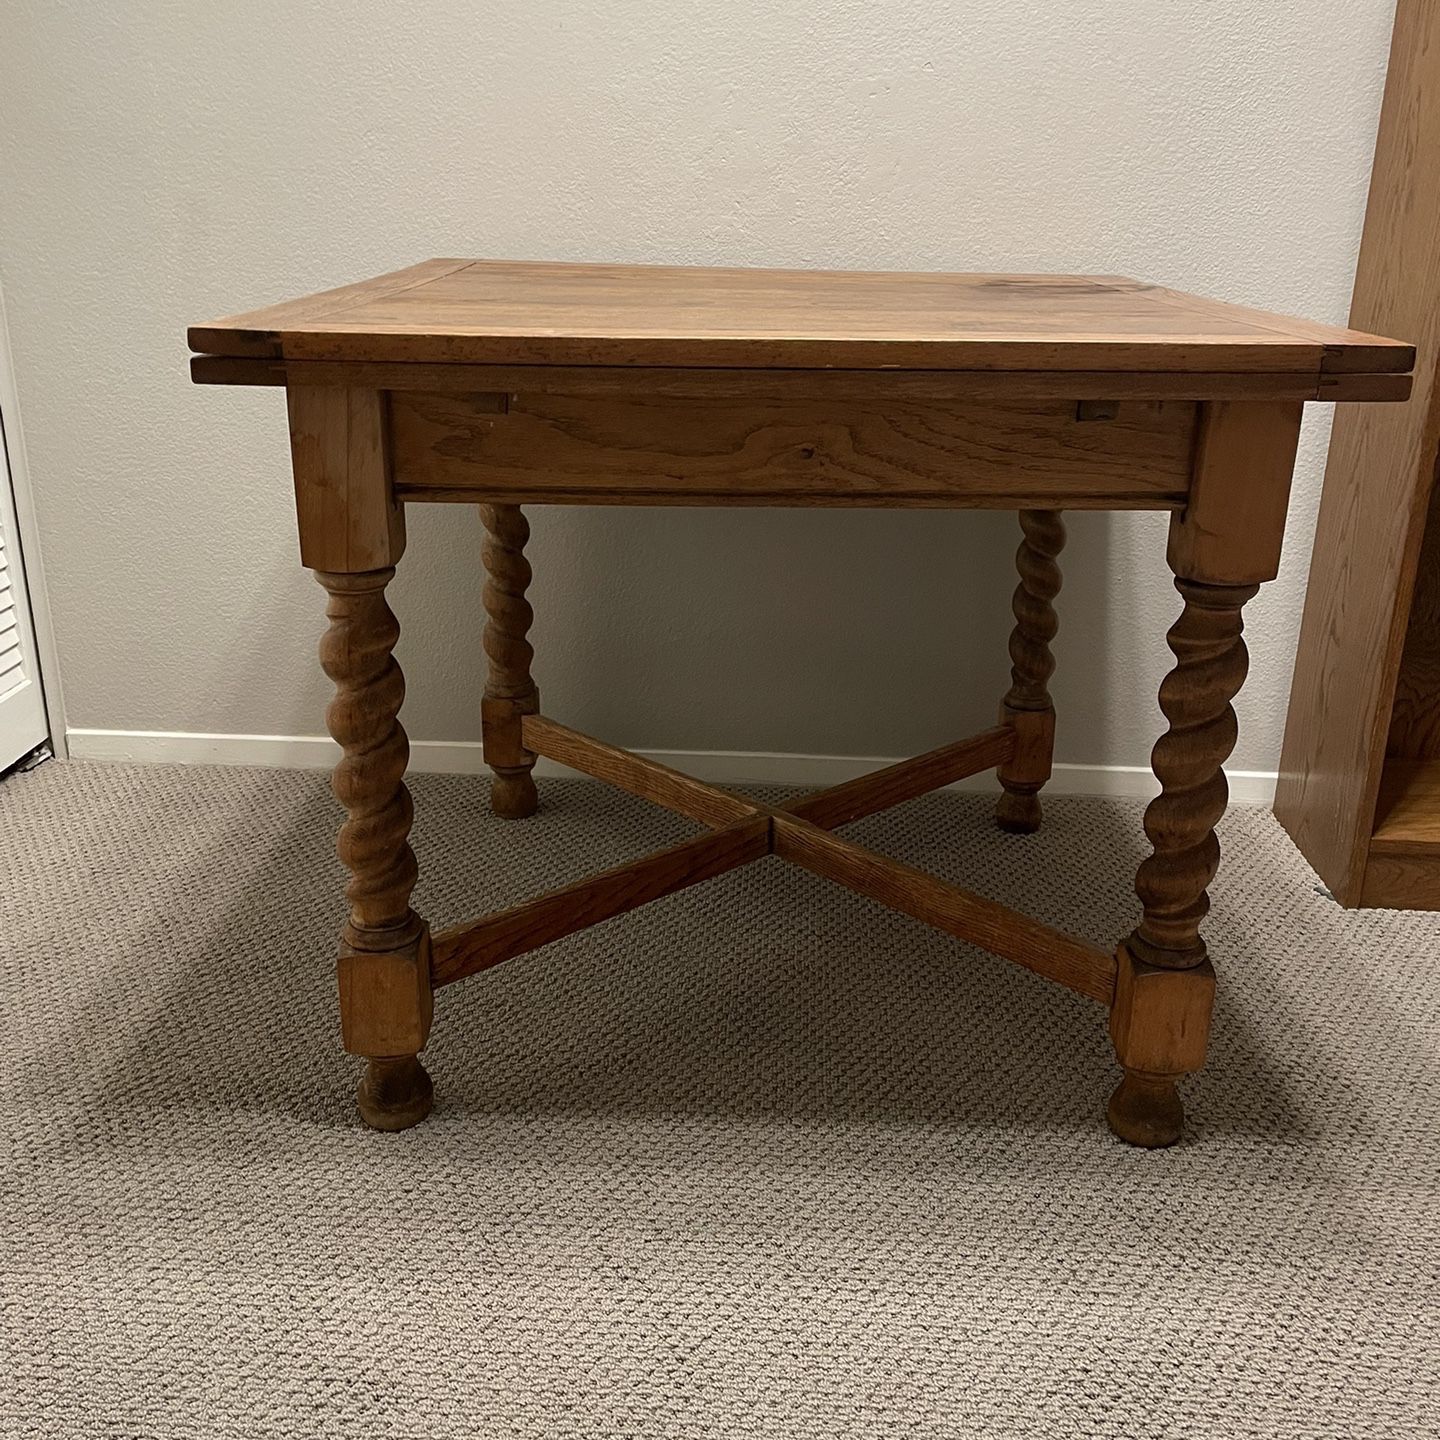 Best Offer!! Antique Wood Expandable Dining Table